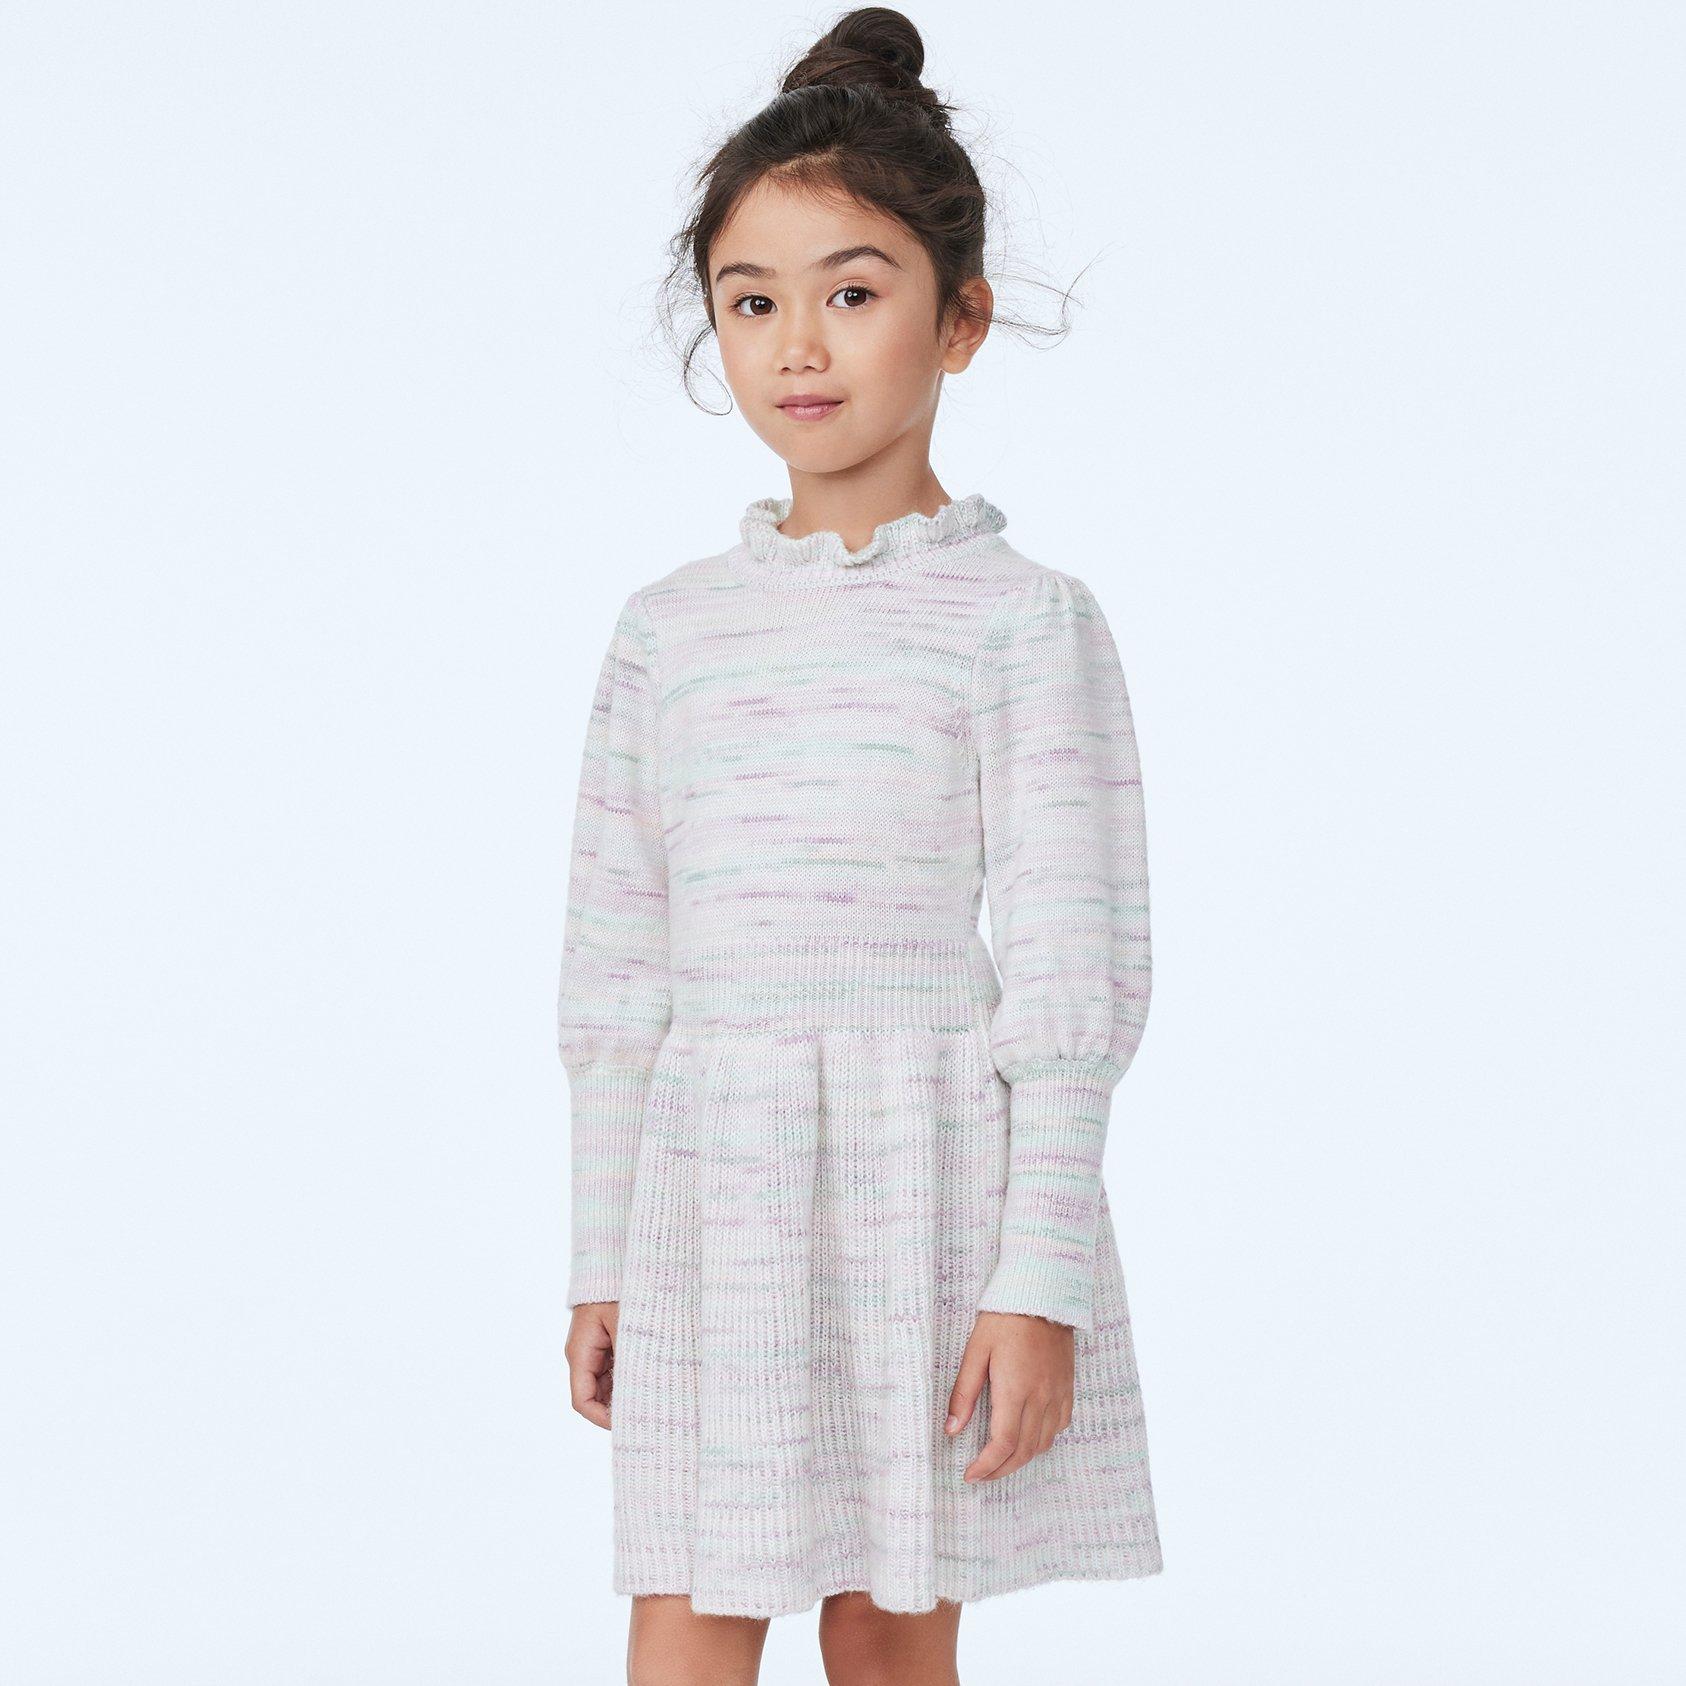 The Cozy Marled Sweater Dress